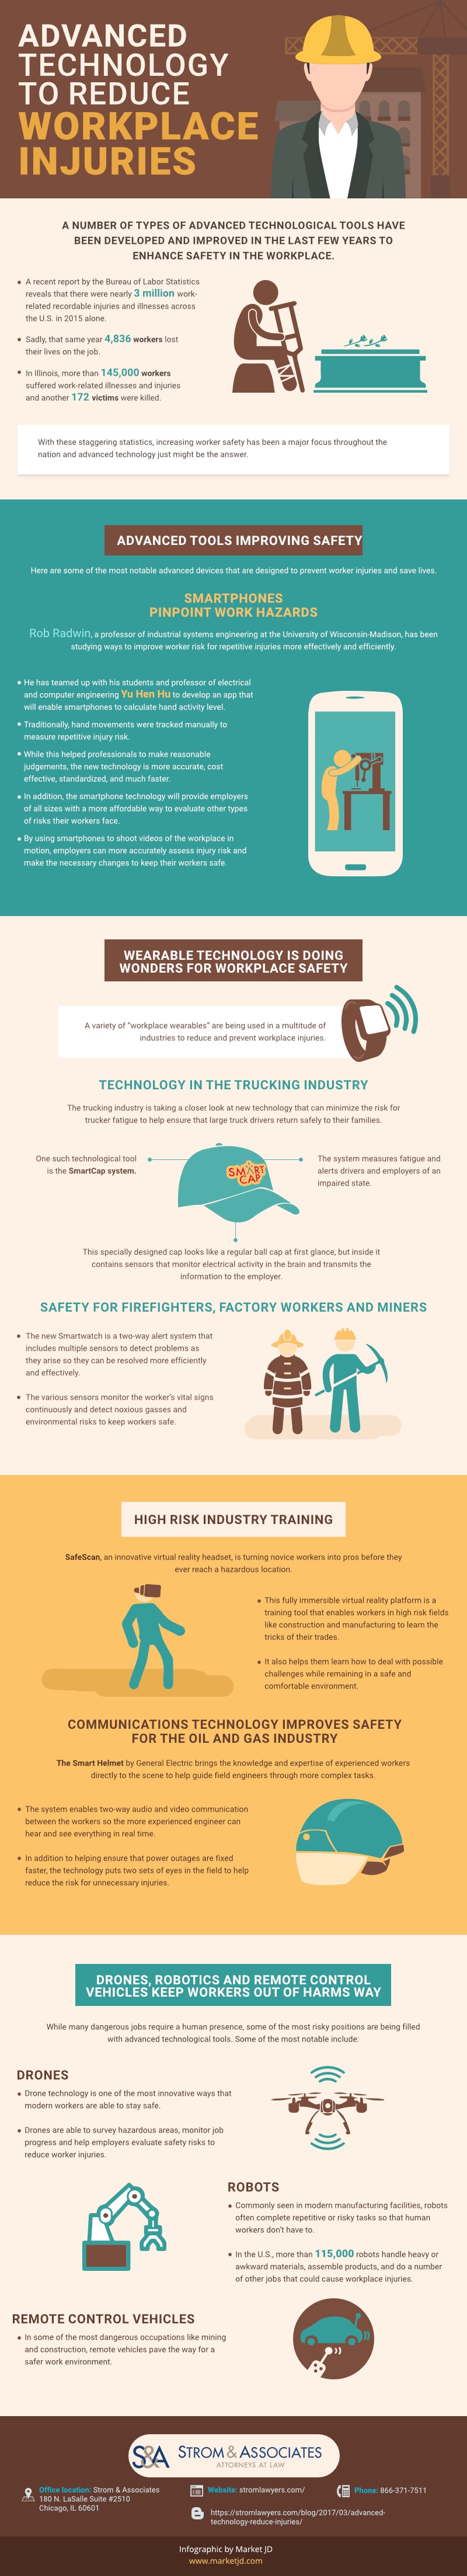 Reduce workplace injuries infographic